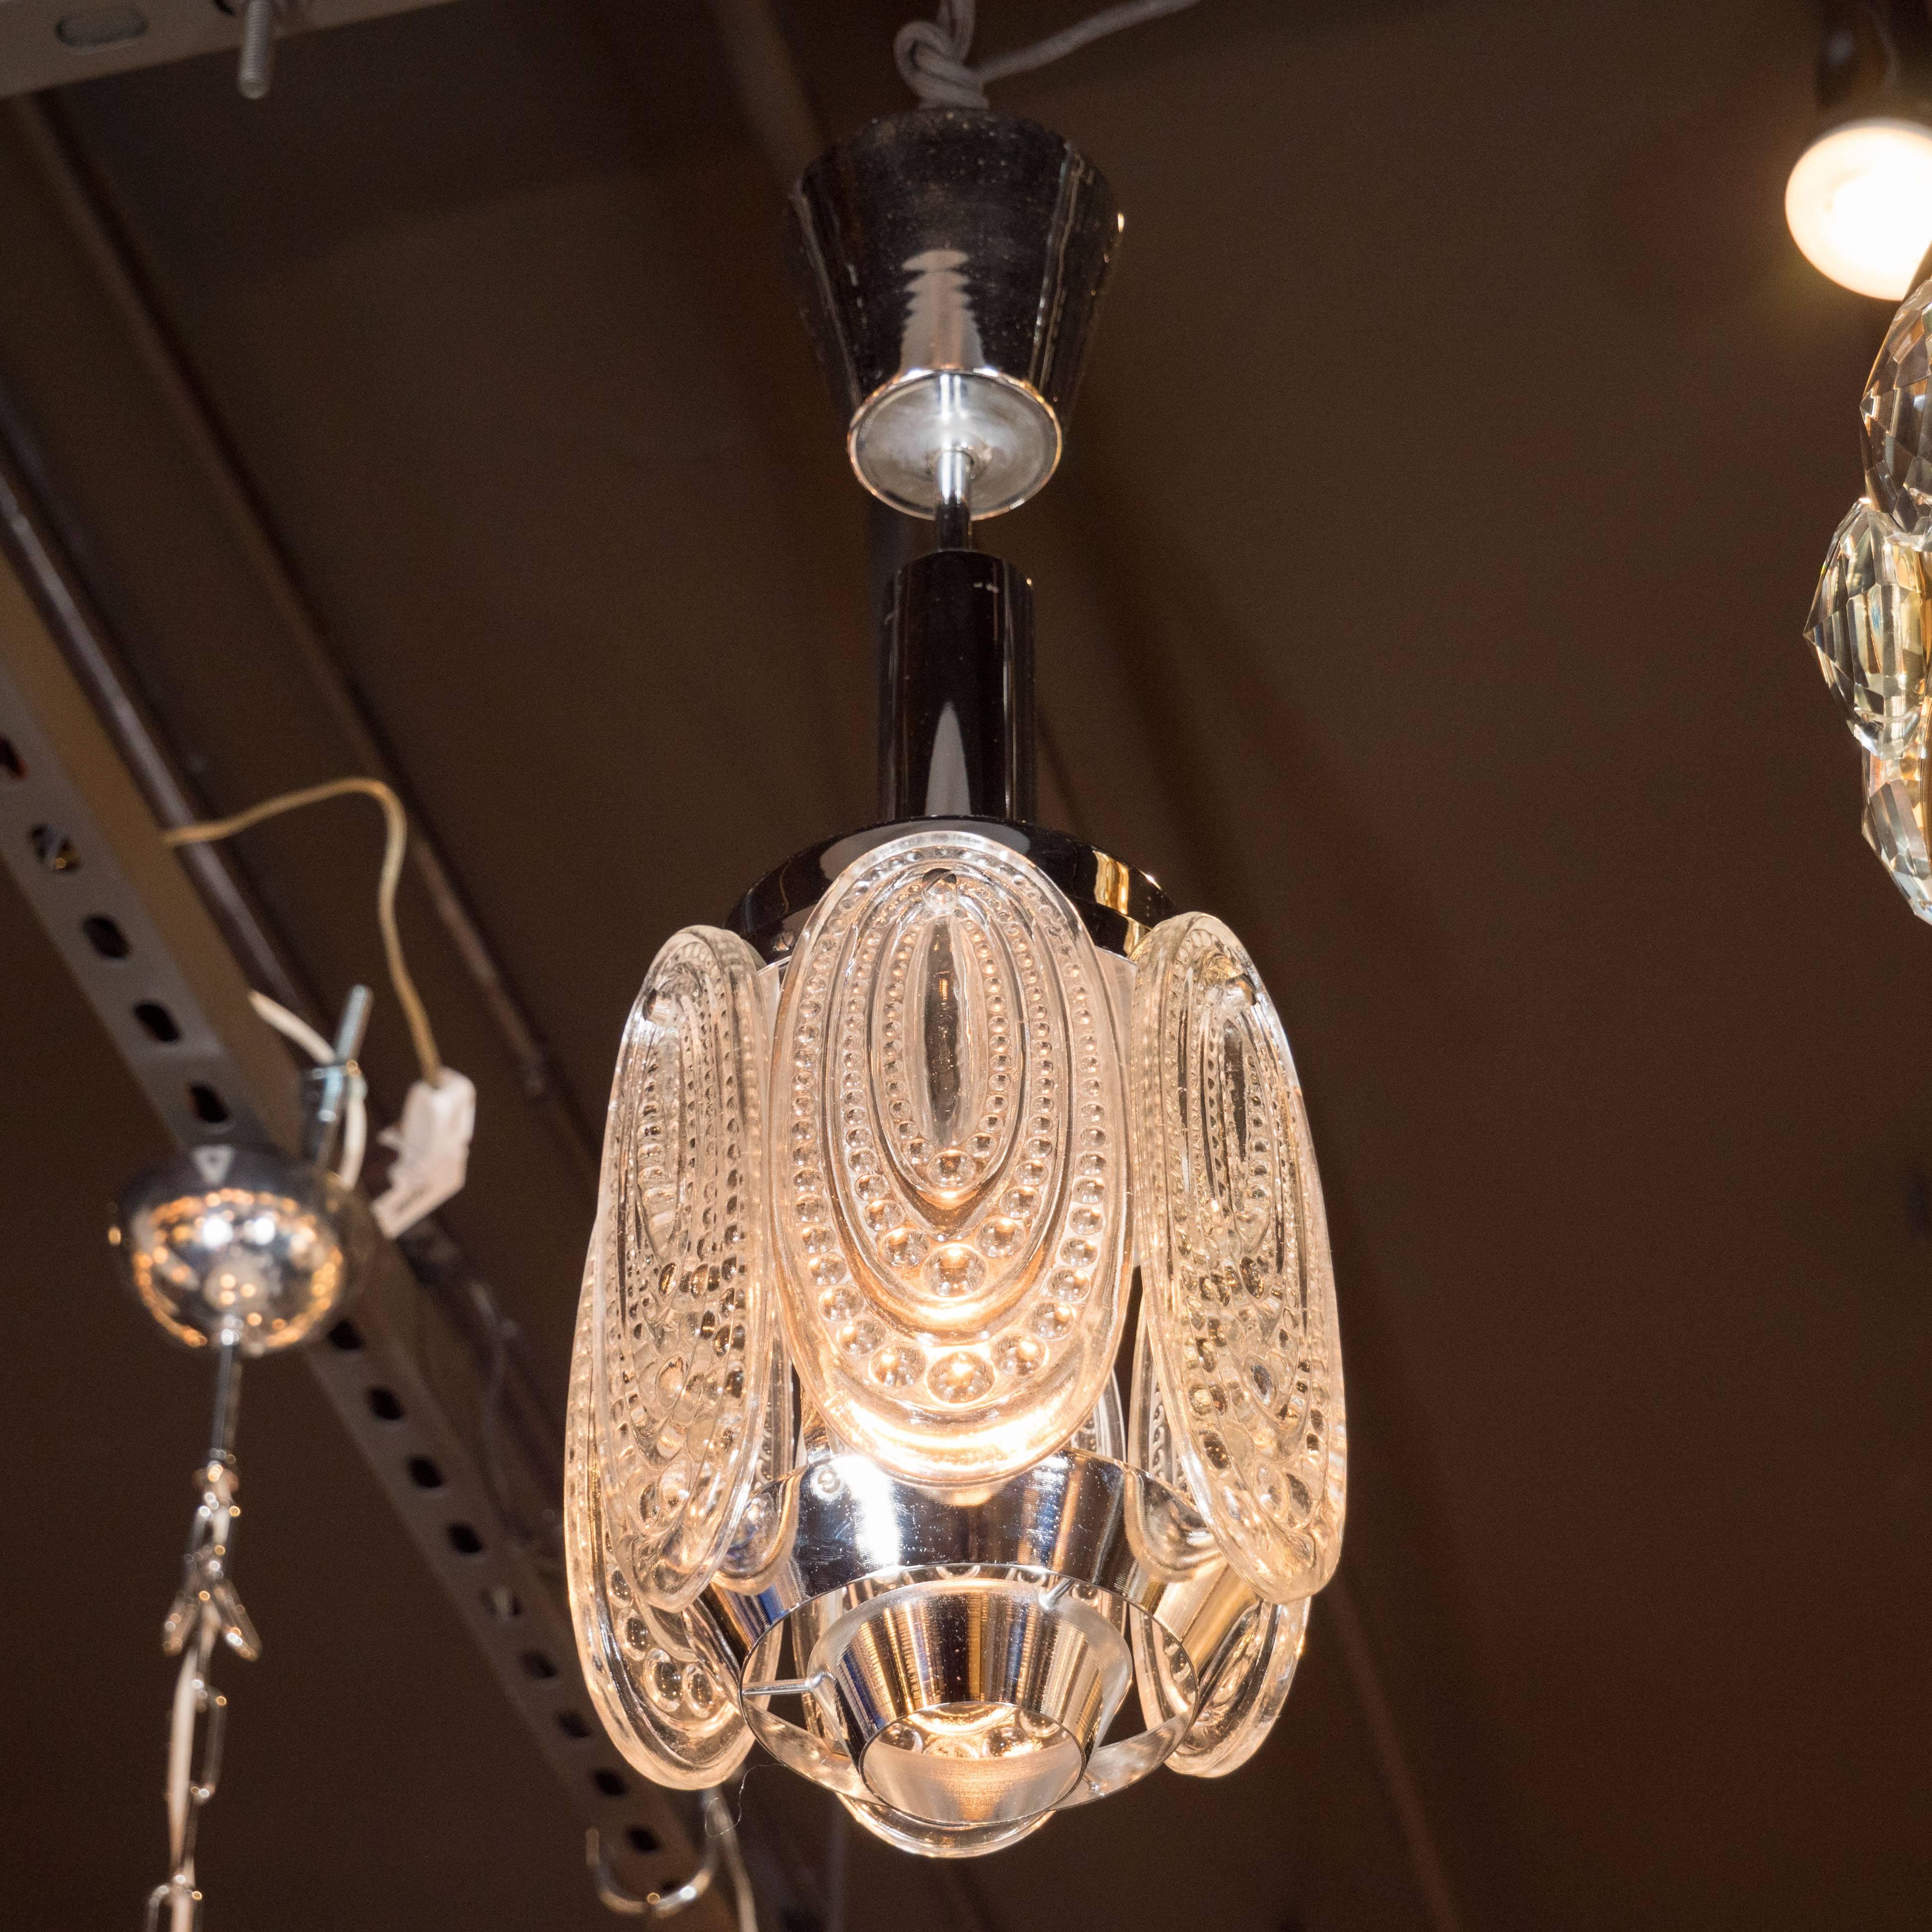 This Mid-Century Modernist pendant features an ornate concentric oval pattern in beaded relief inscribed on each of the six glass petals and polished nickel fittings. This clean and sophisticated design would match well with virtually any style of